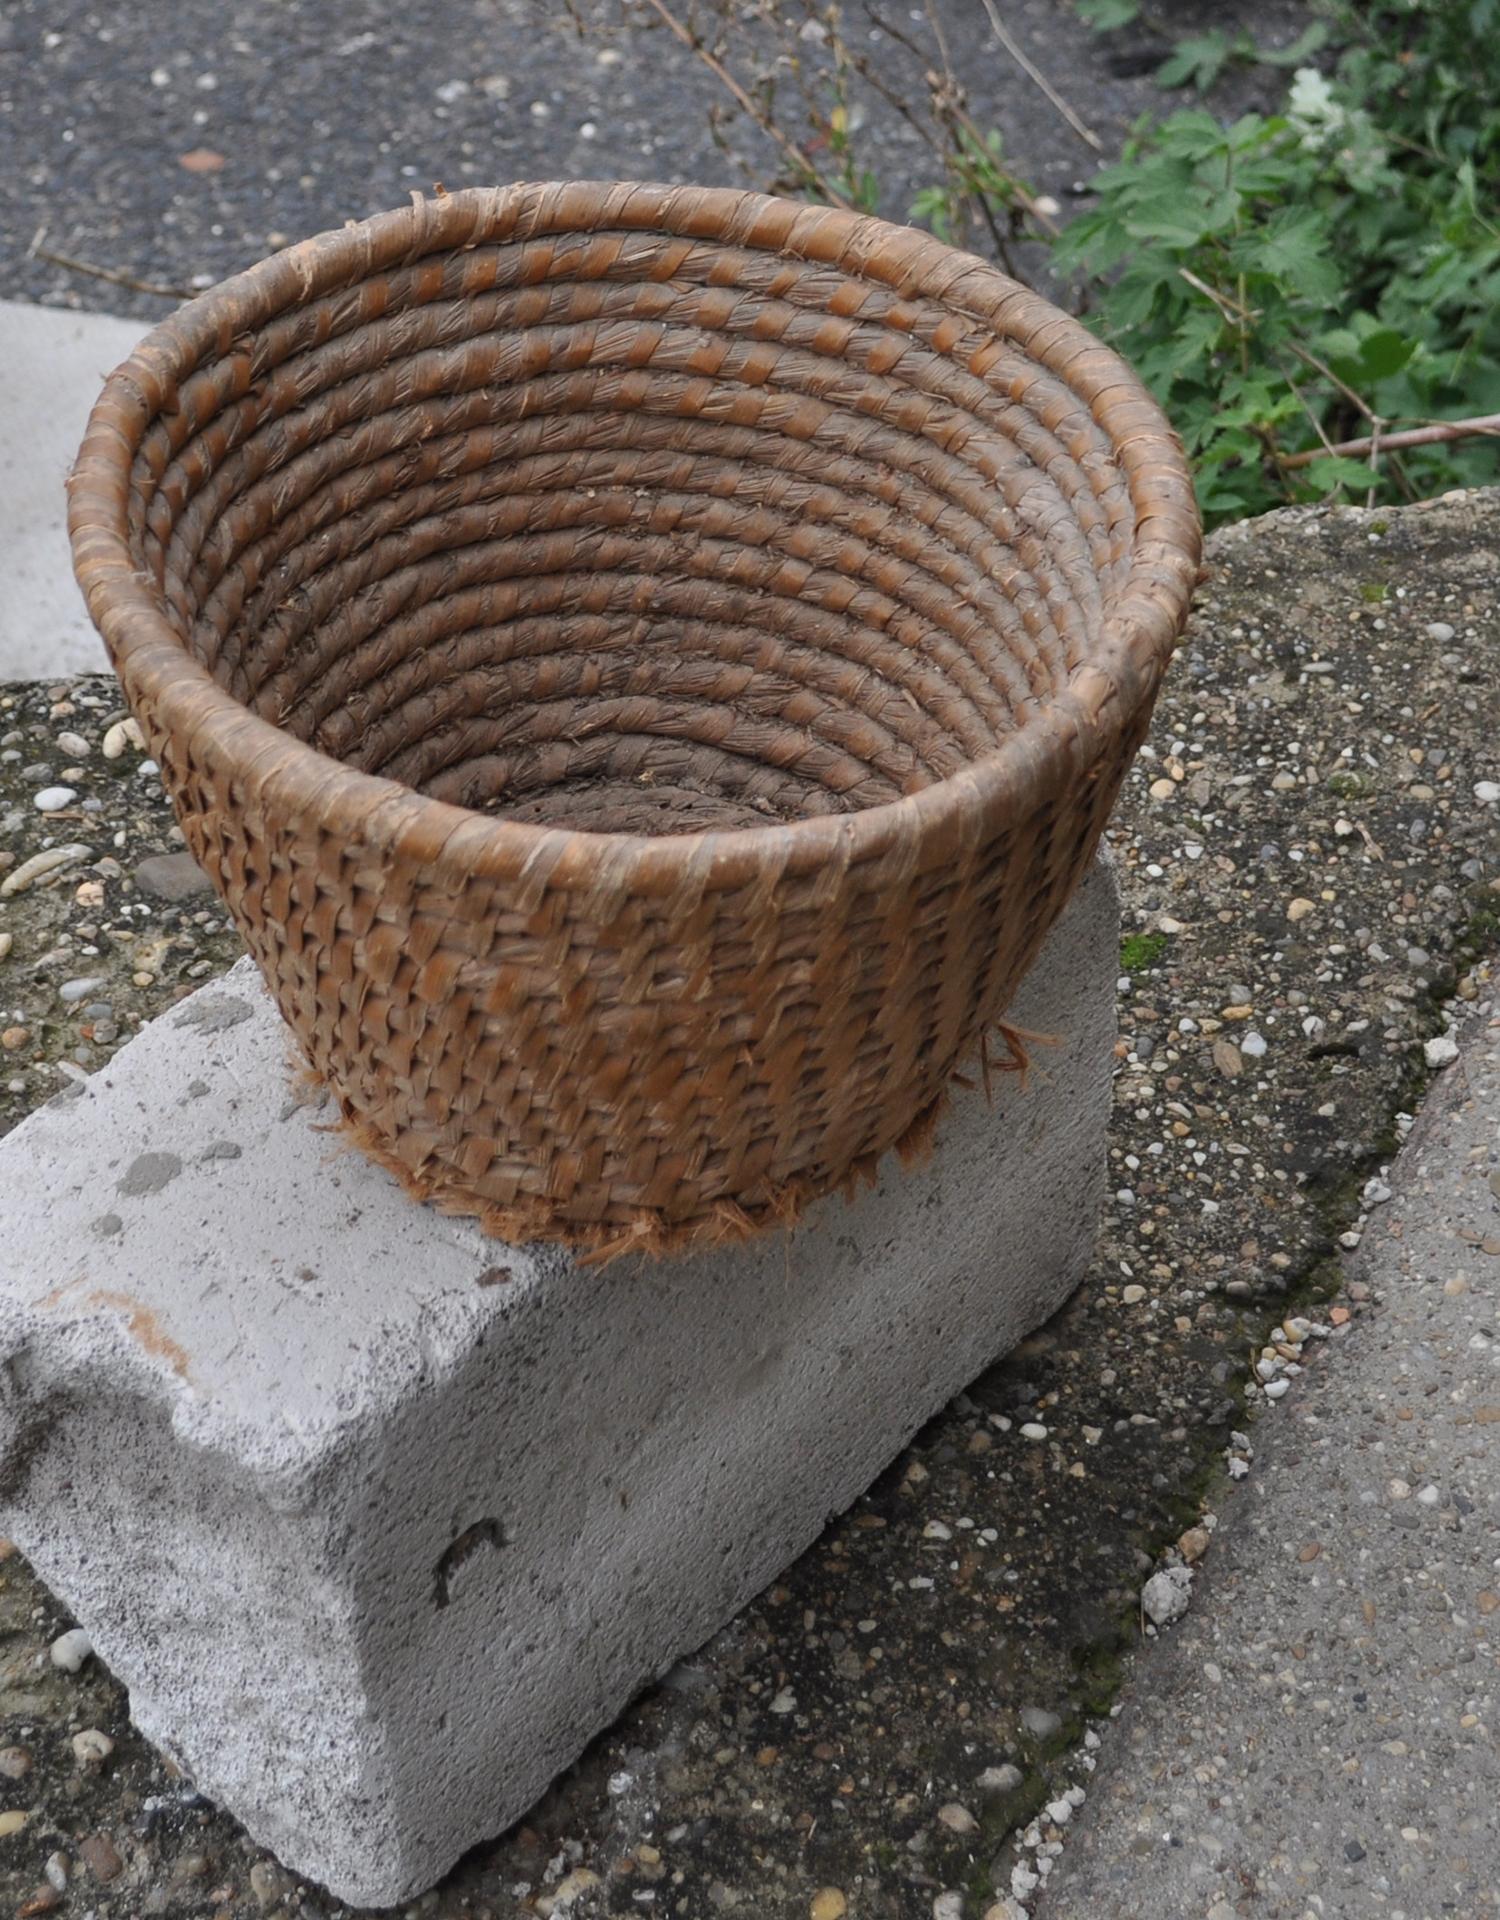 This item is an vintage handwoven rye coiled straw basket.